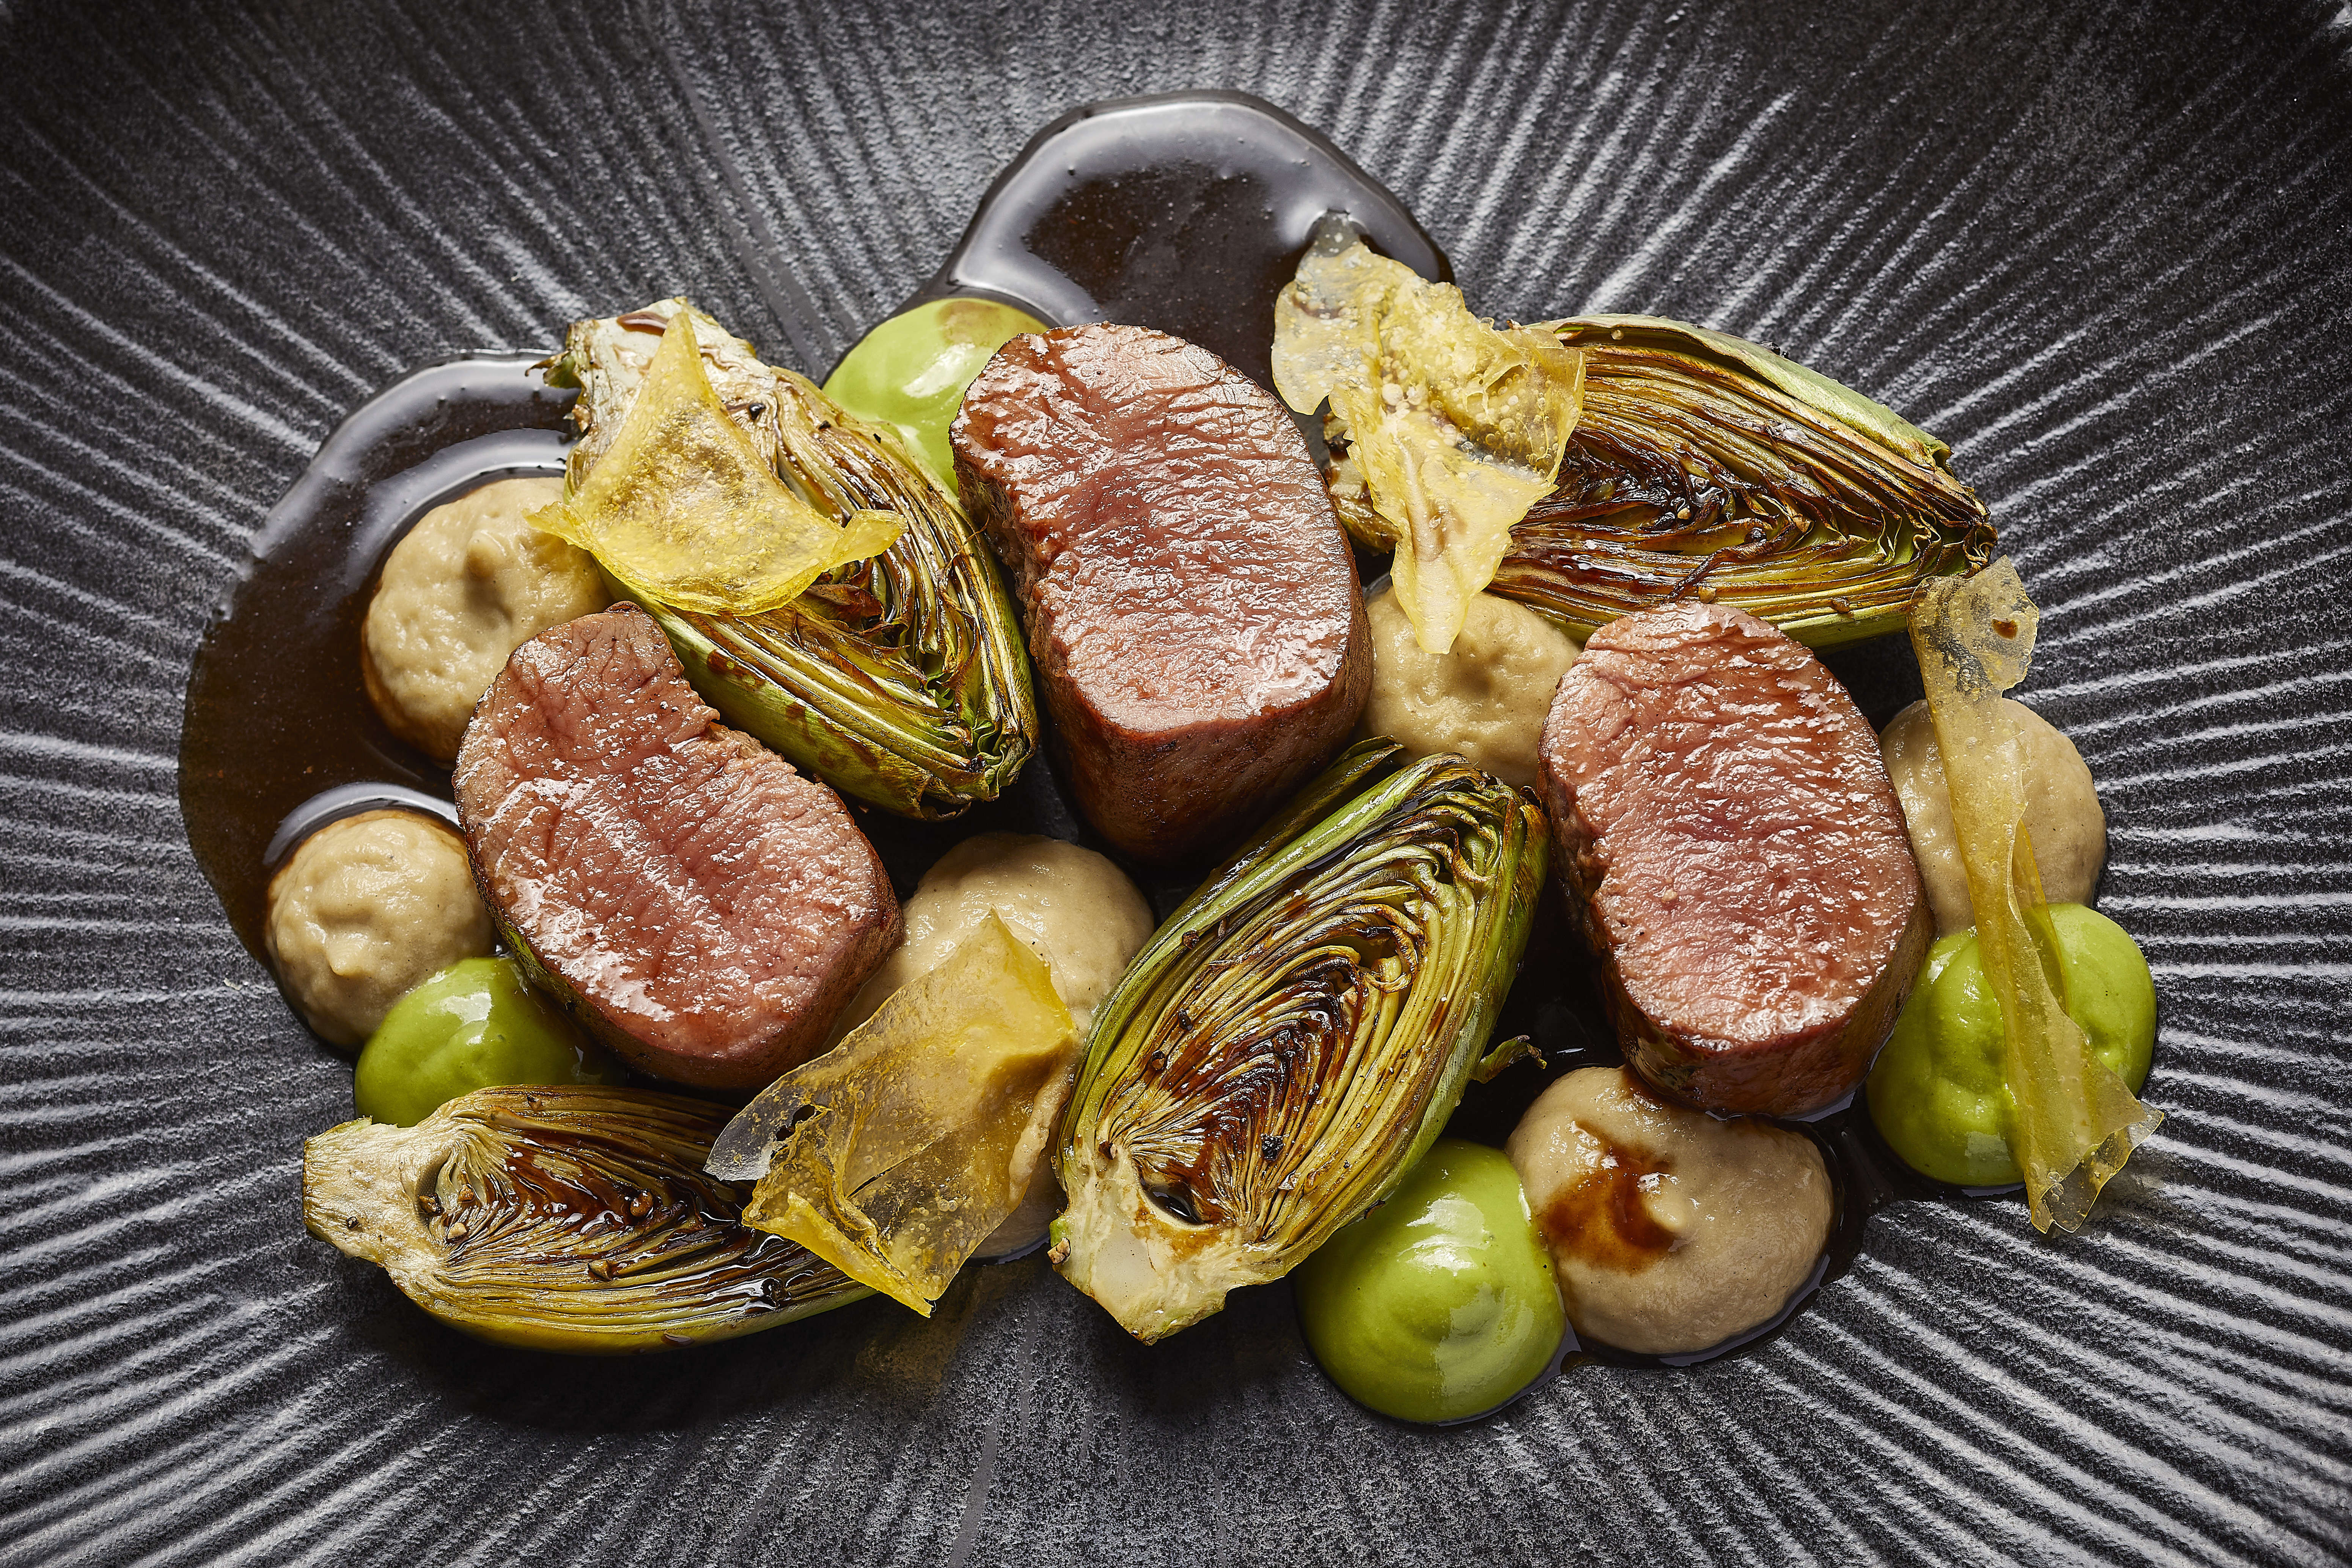 Slow-cooked New Zealand lamb loin with smoked aubergine purée, roasted artichokes and mint salsa verde. Photo: Spiga